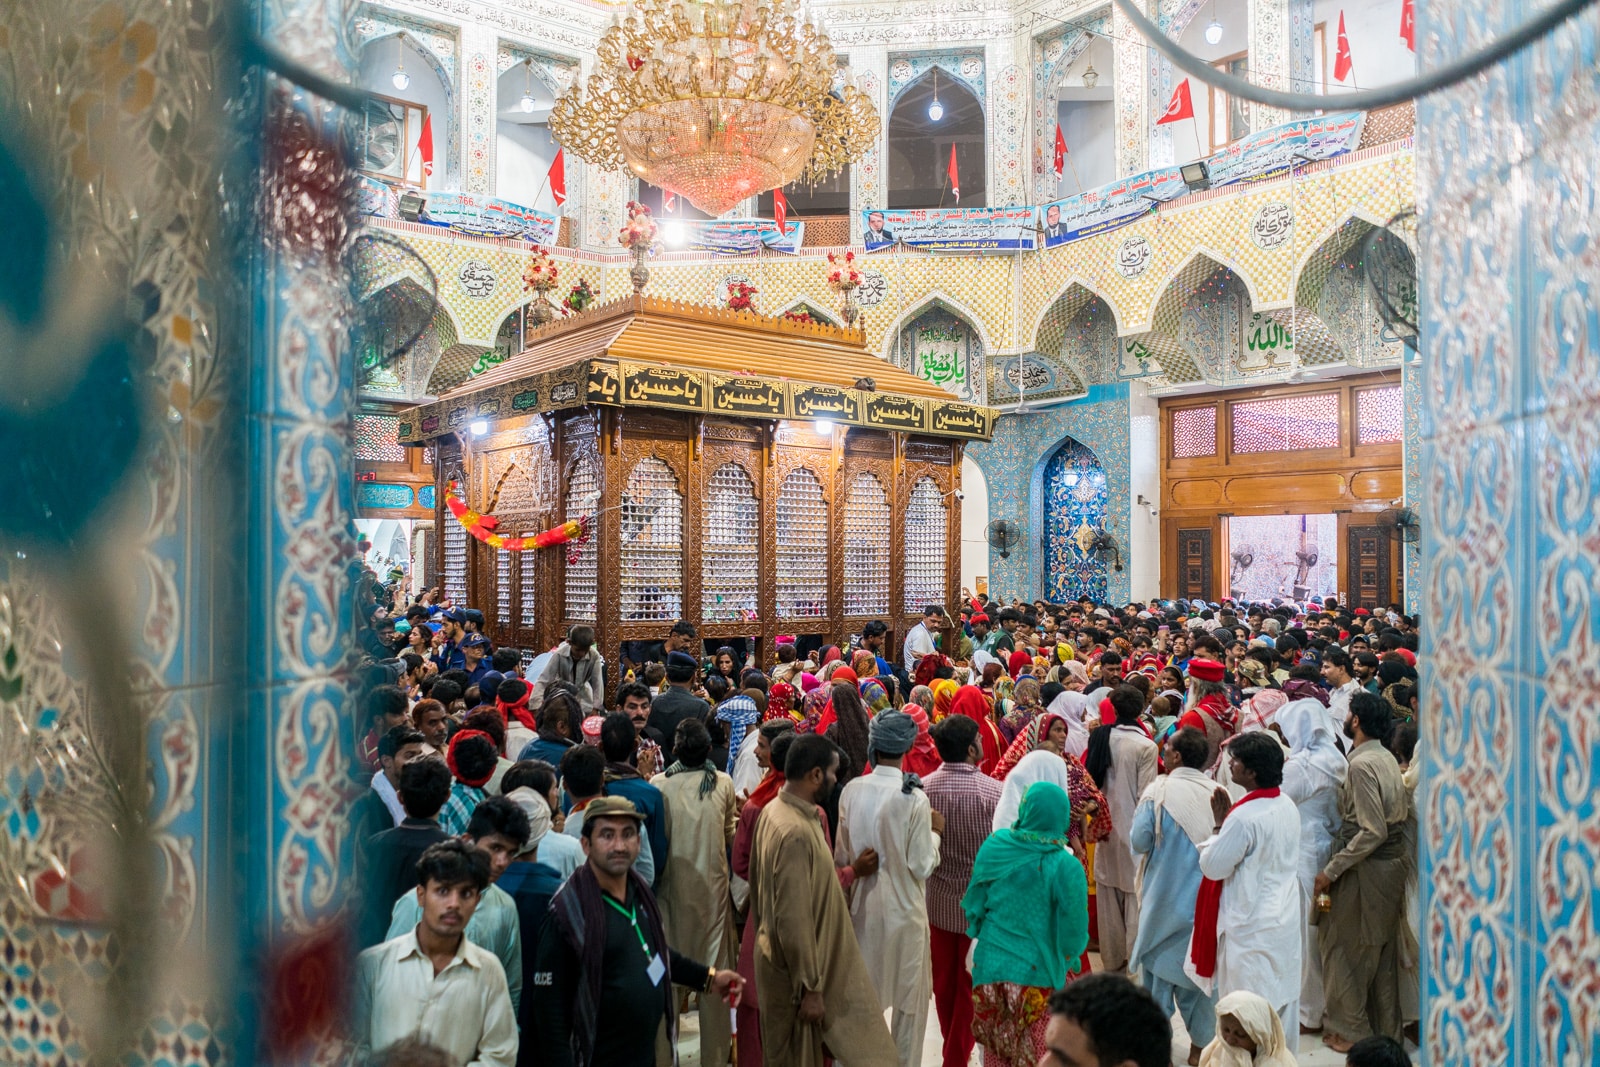 Sindh travel guide - Interior of the shrine of Lal Shahbaz Qalandar in Sehwan Sharif, Pakistan - Lost With Purpose travel blog